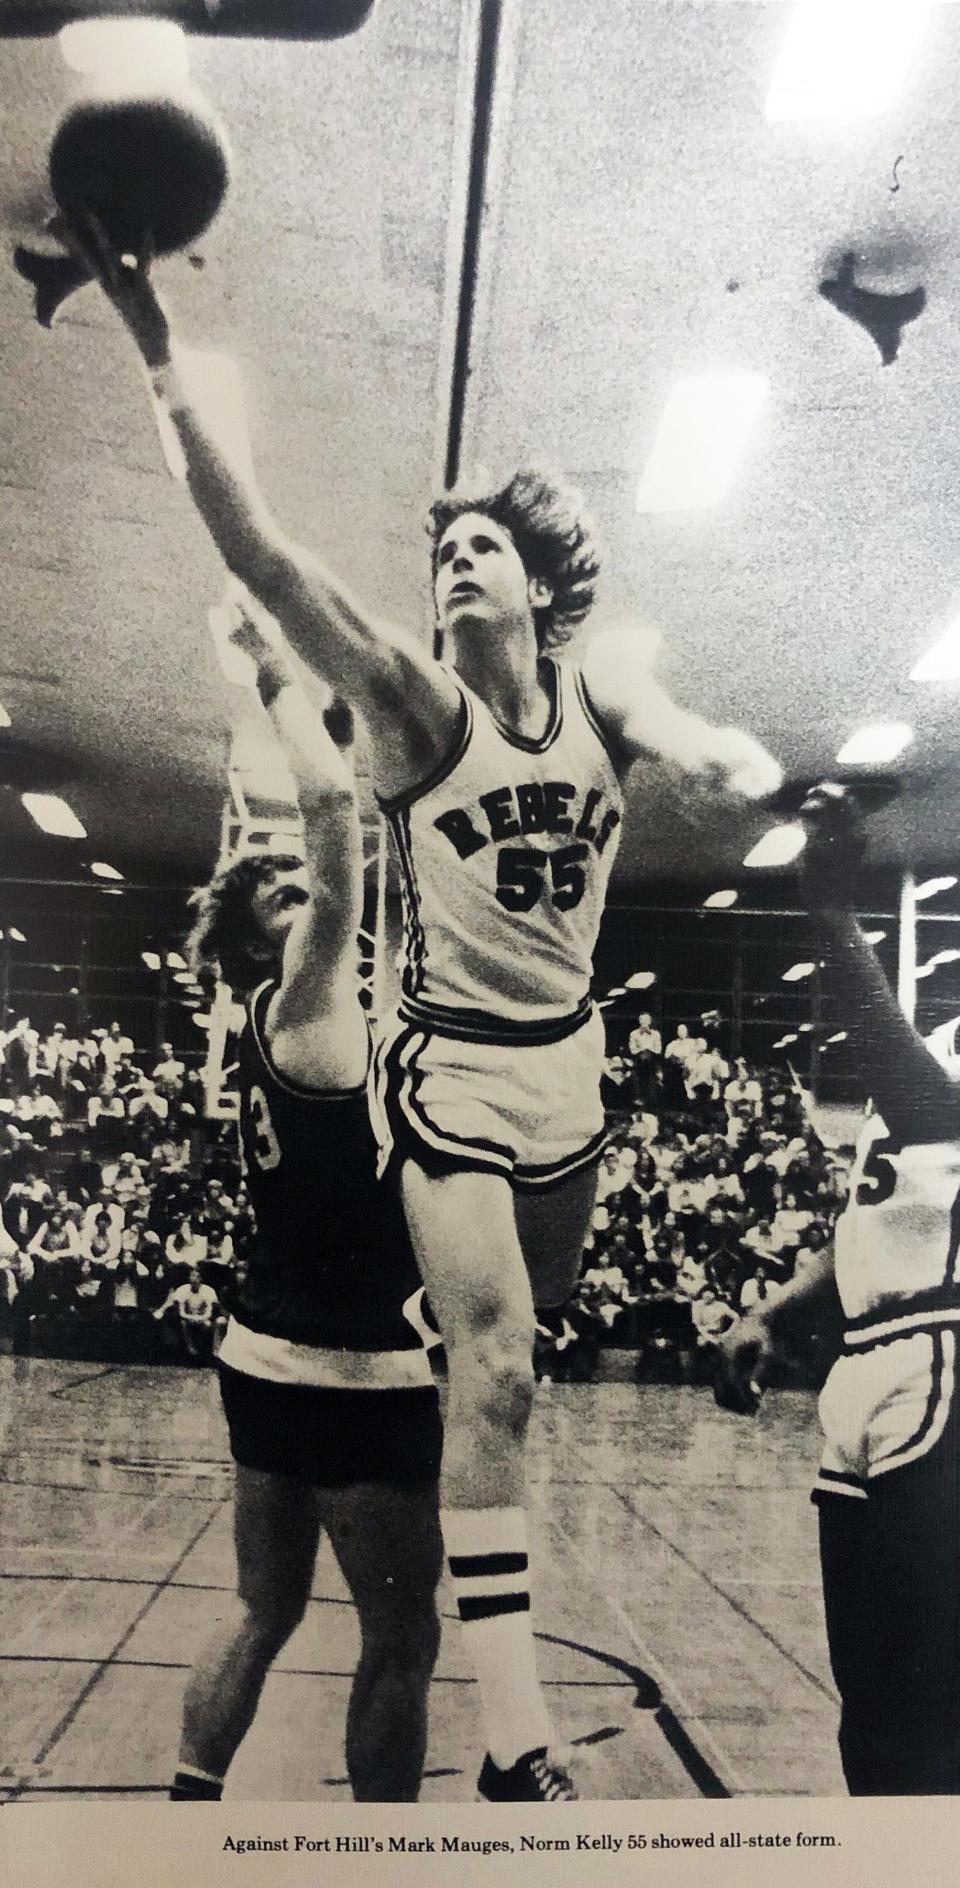 Norm Kelly, a 6-foot-7 center, set the South Hagerstown single-season scoring record (since broken) during the Rebels' 1973-74 state championship season.